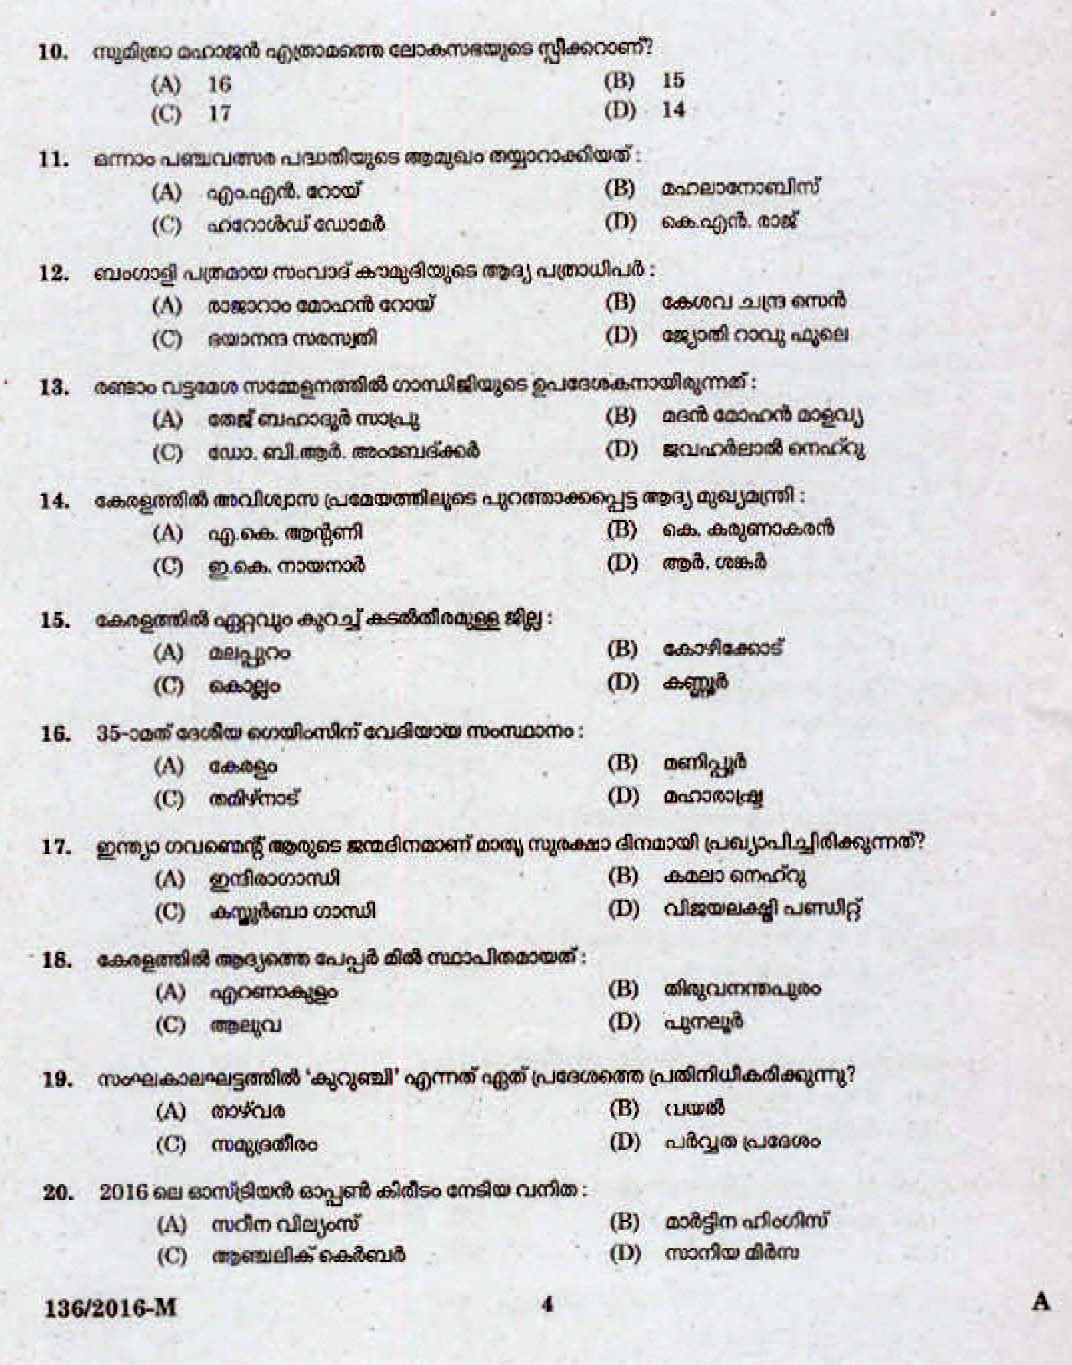 LD Clerk Question Paper Malayalam 2016 Paper Code 1362016 M 2